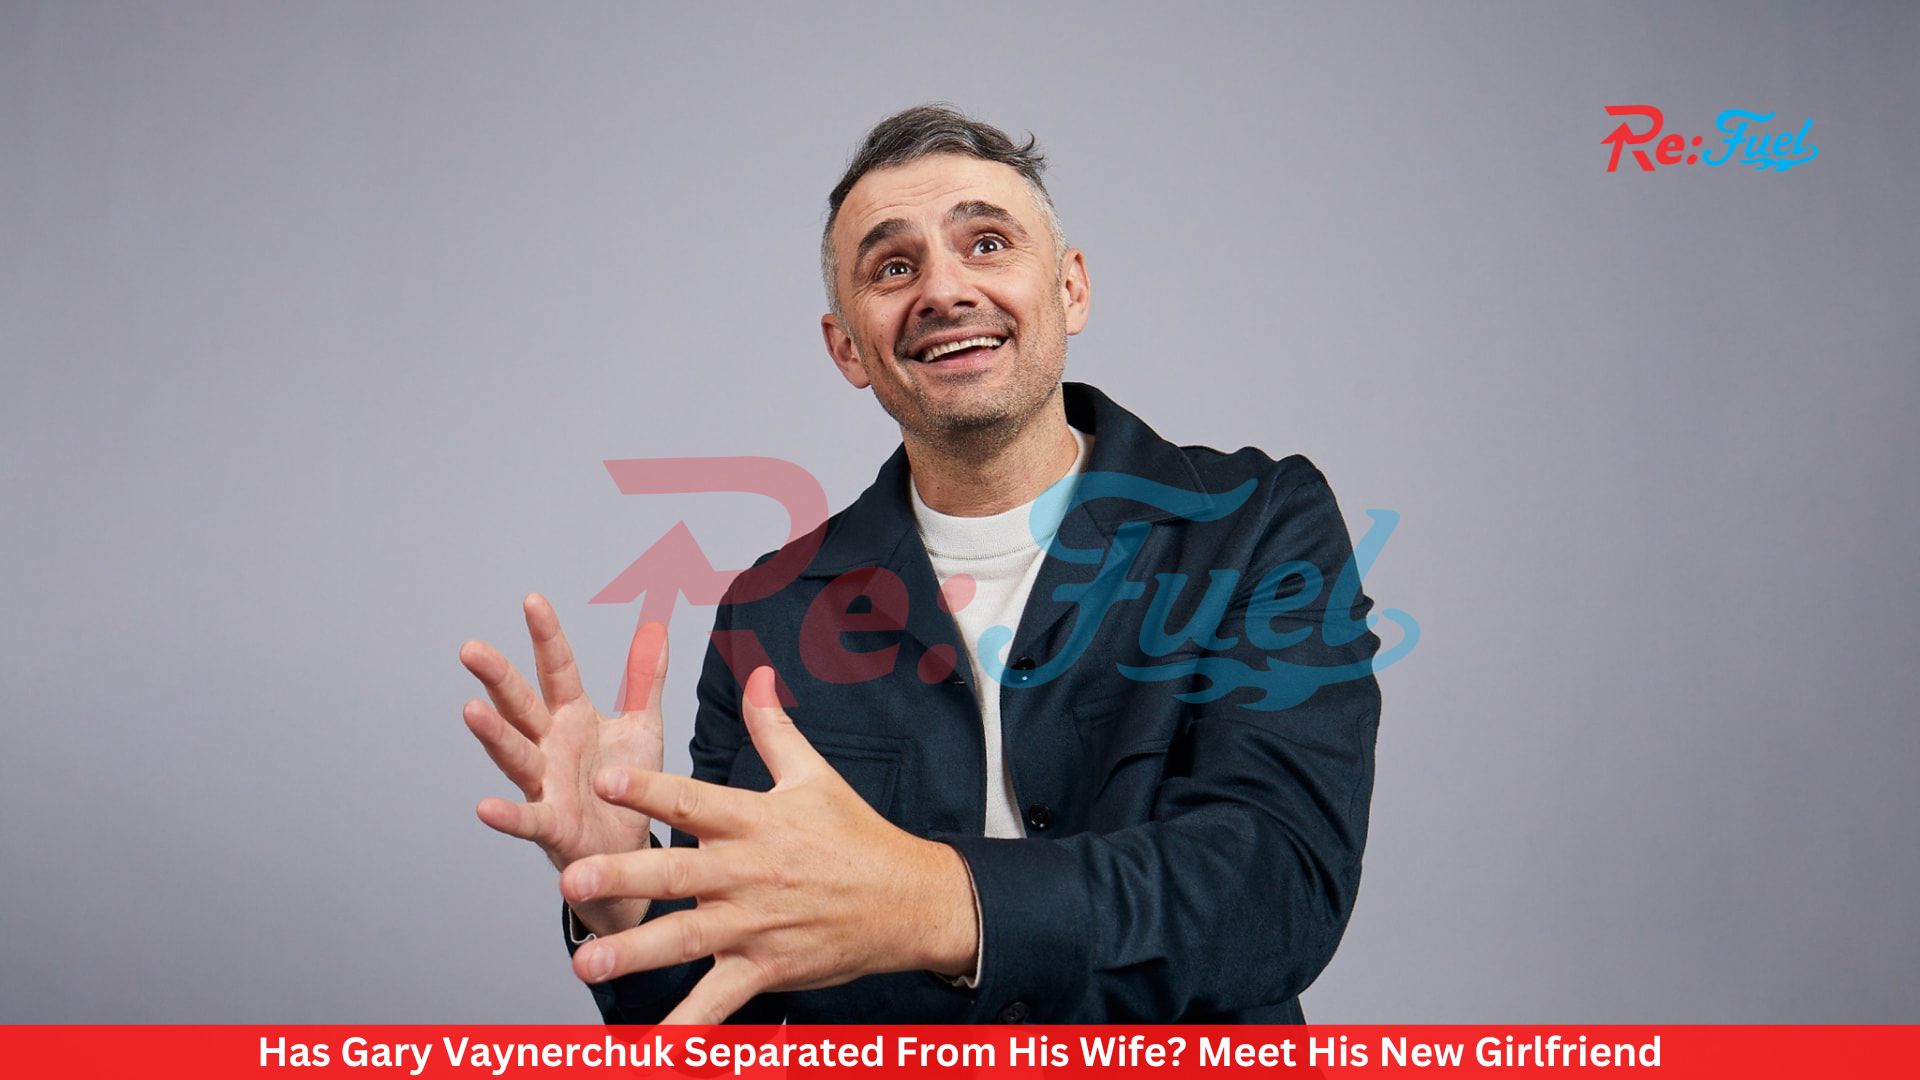 Has Gary Vaynerchuk Separated From His Wife? Meet His New Girlfriend